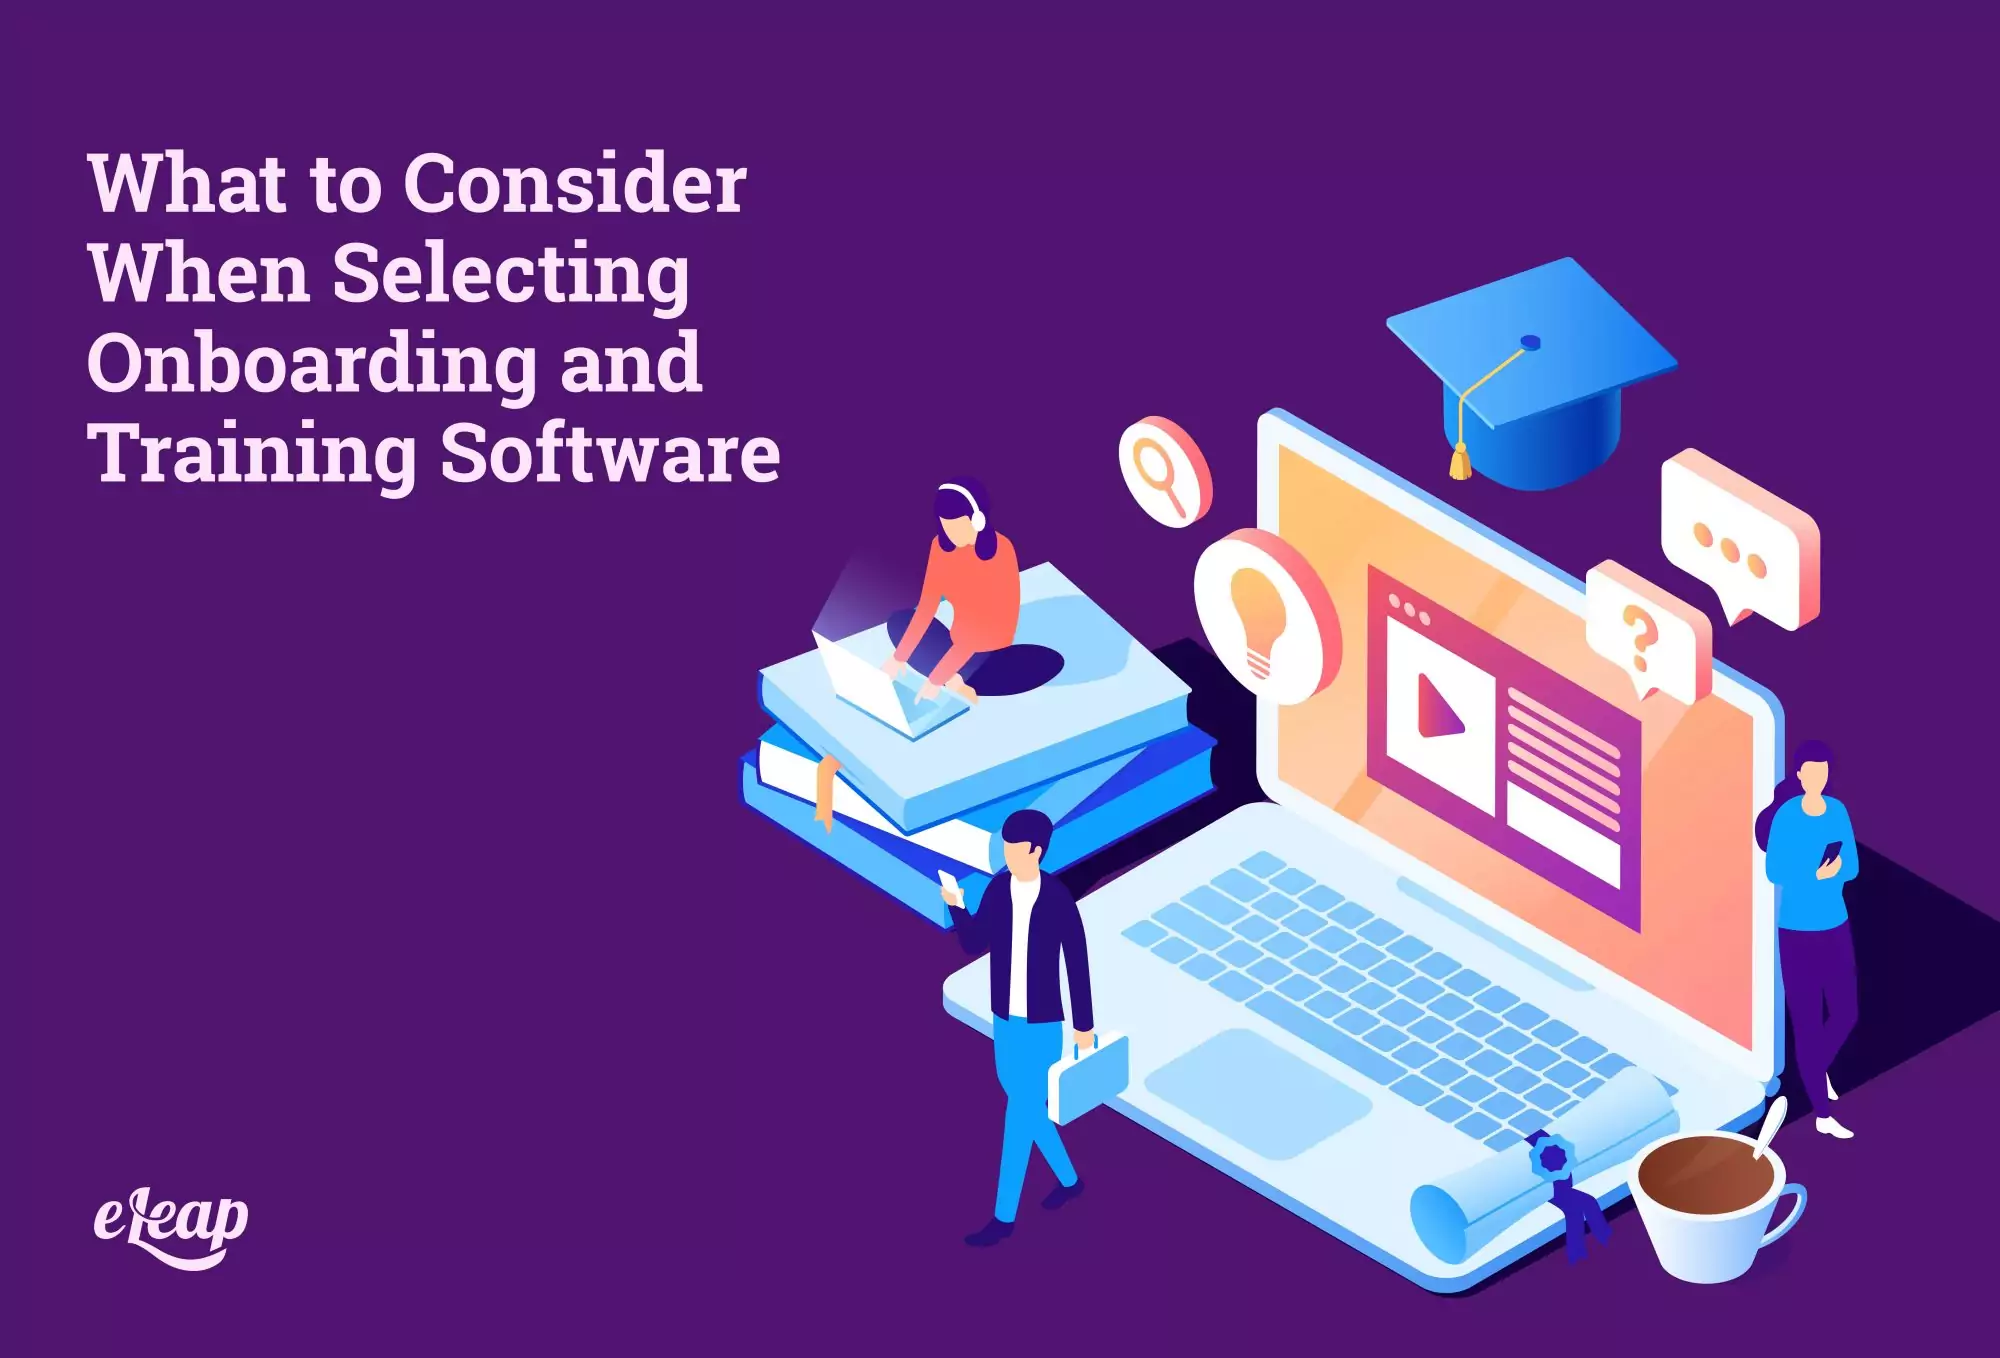 What to Consider When Selecting Onboarding and Training Software